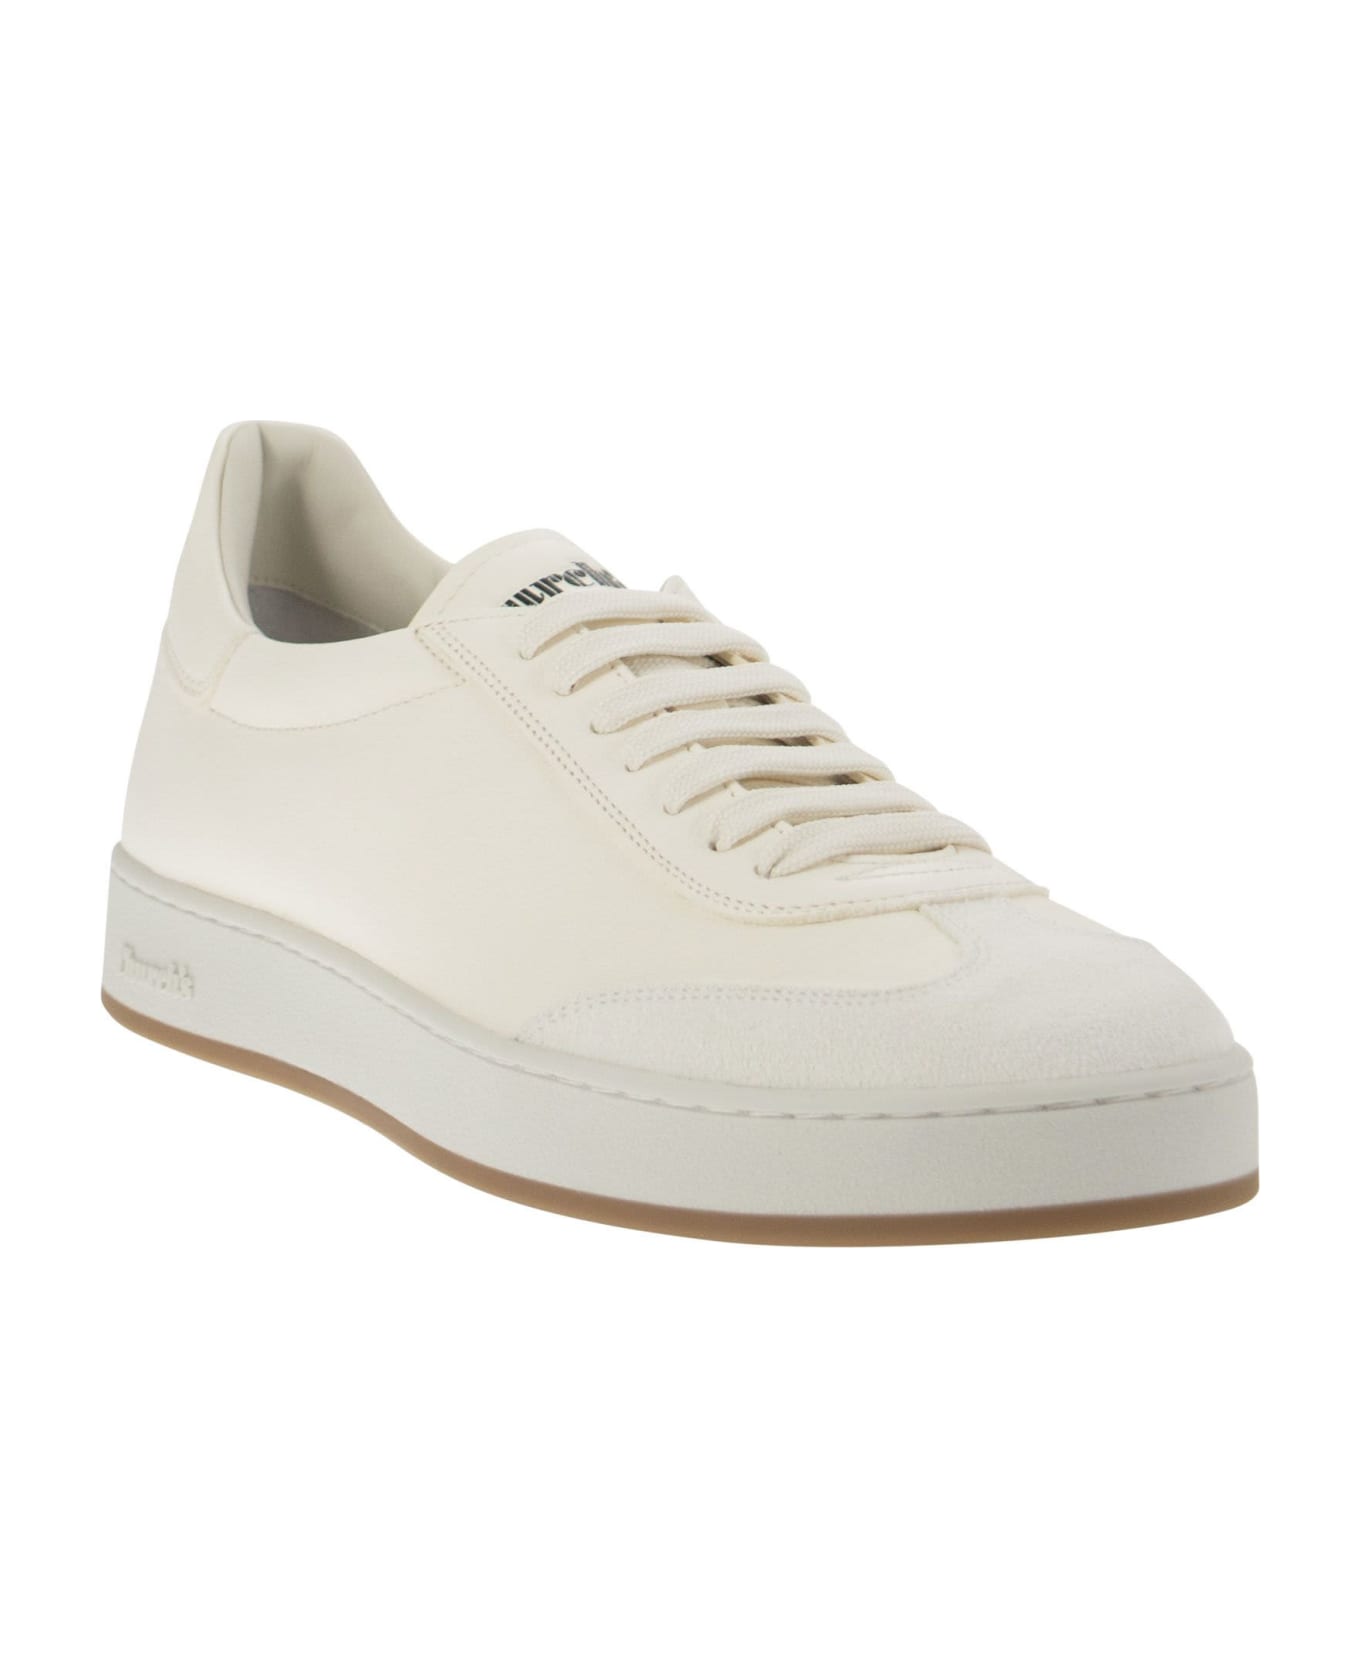 Church's Largs - Suede And Deerskin Sneaker - All Ivory スニーカー